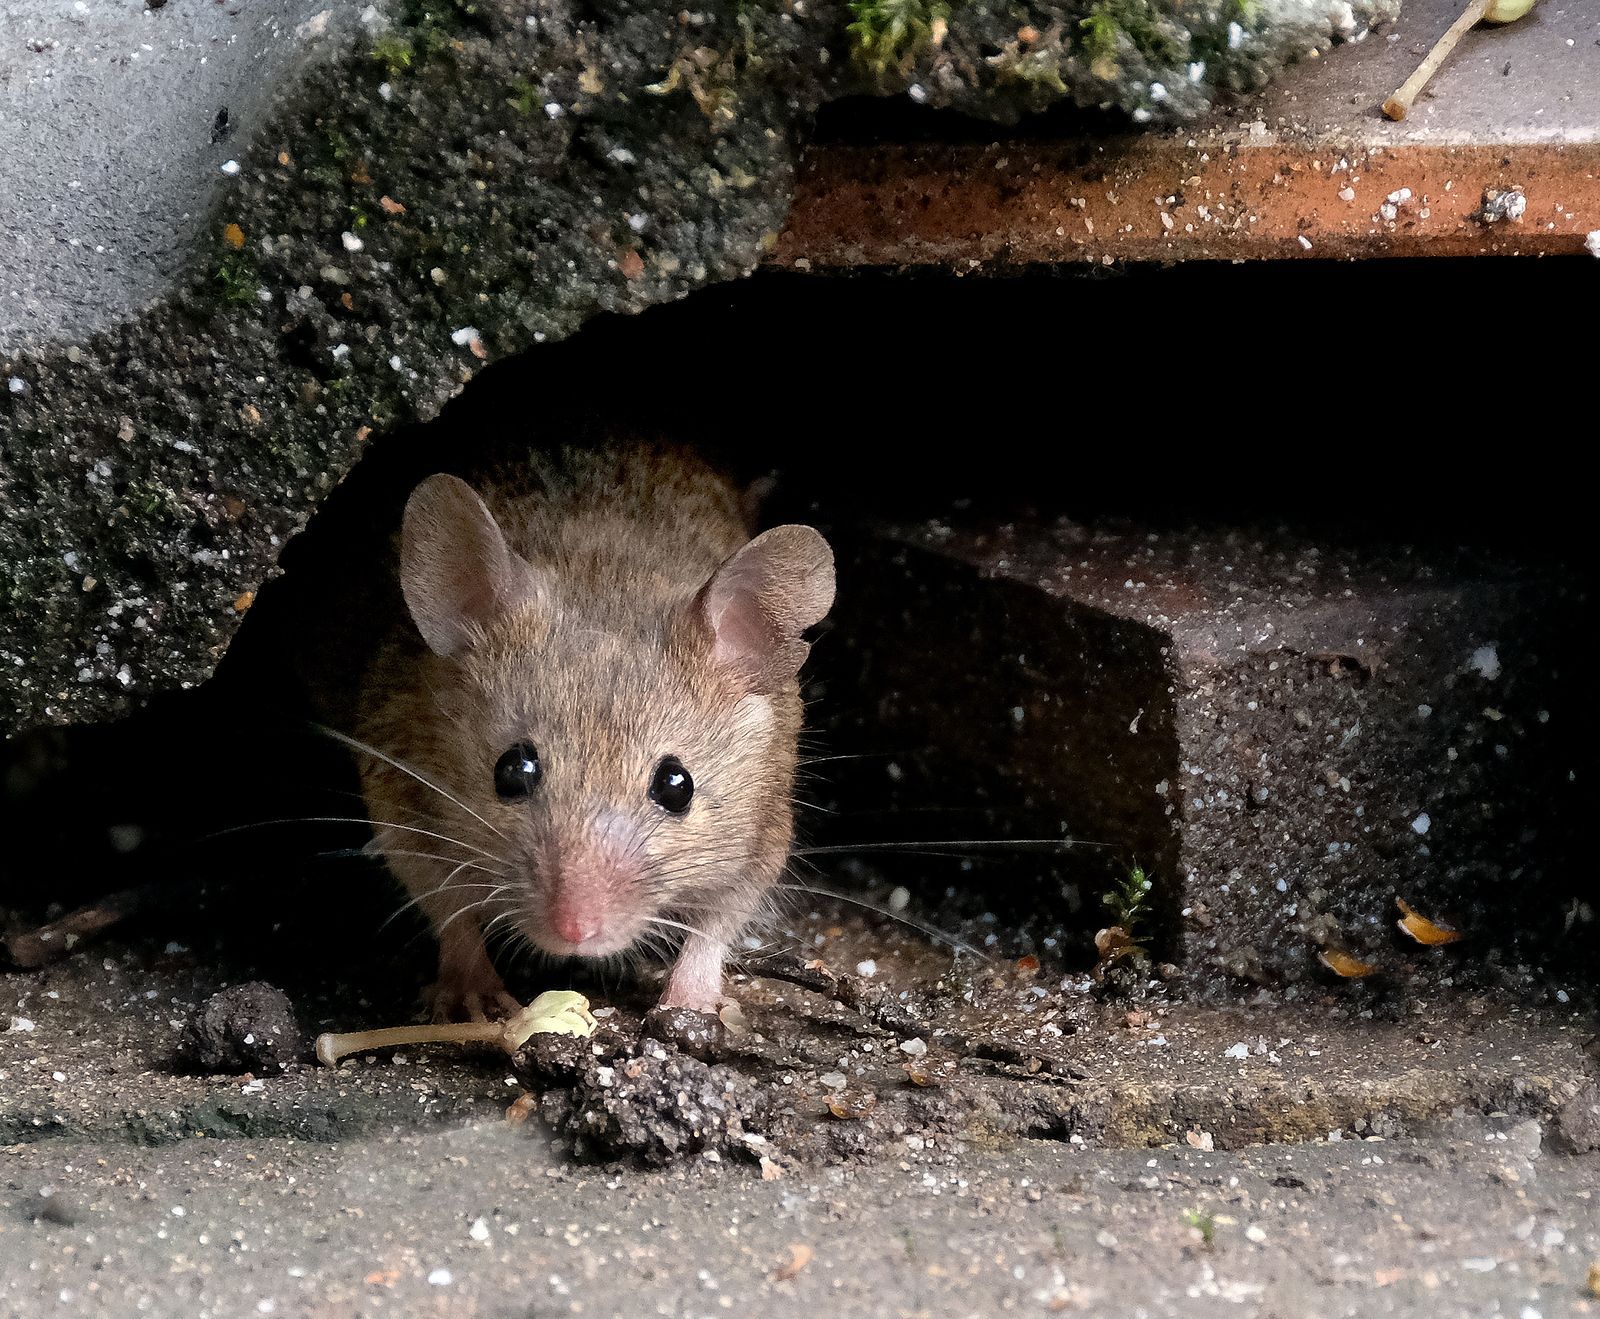 A mouse is looking out of a hole in the ground